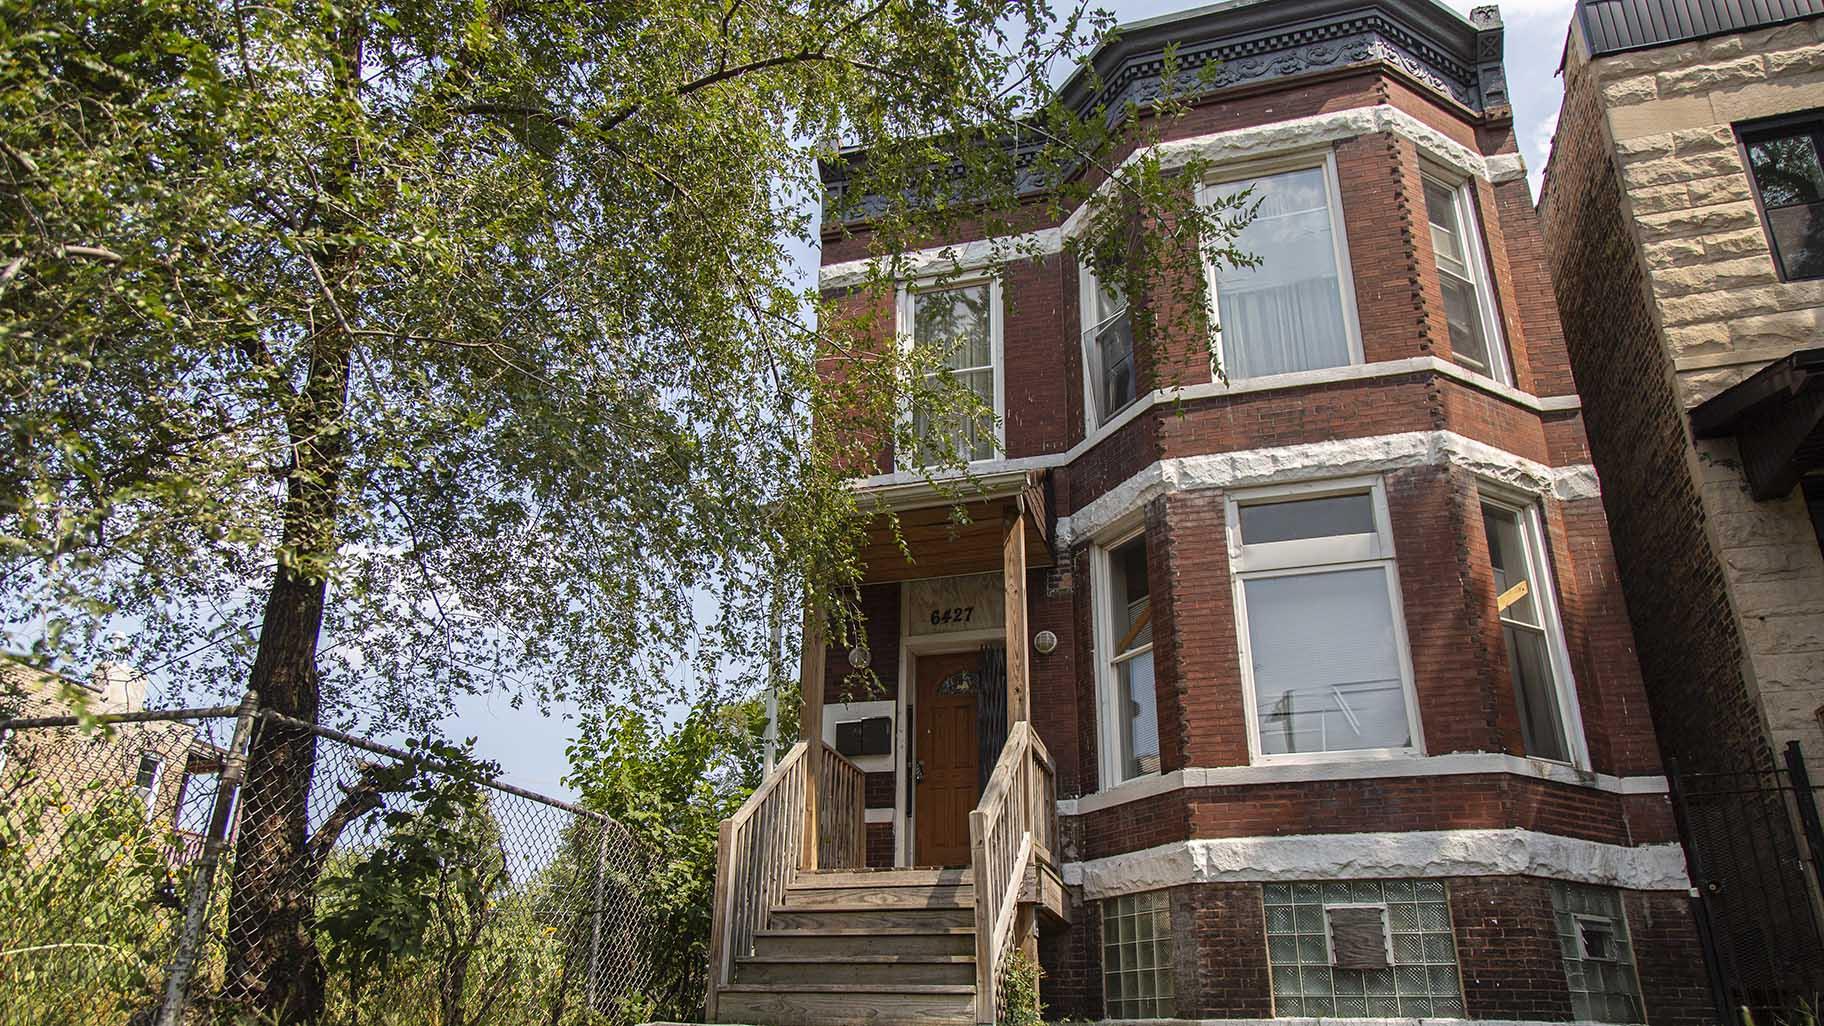 In this Aug. 26, 2020 file photo, the former home of Emmett and Mamie Till at 6427 S St. Lawrence Avenue is pictured in the West Woodlawn neighborhood of Chicago. (Anthony Vazquez / Chicago Sun-Times via AP, File)